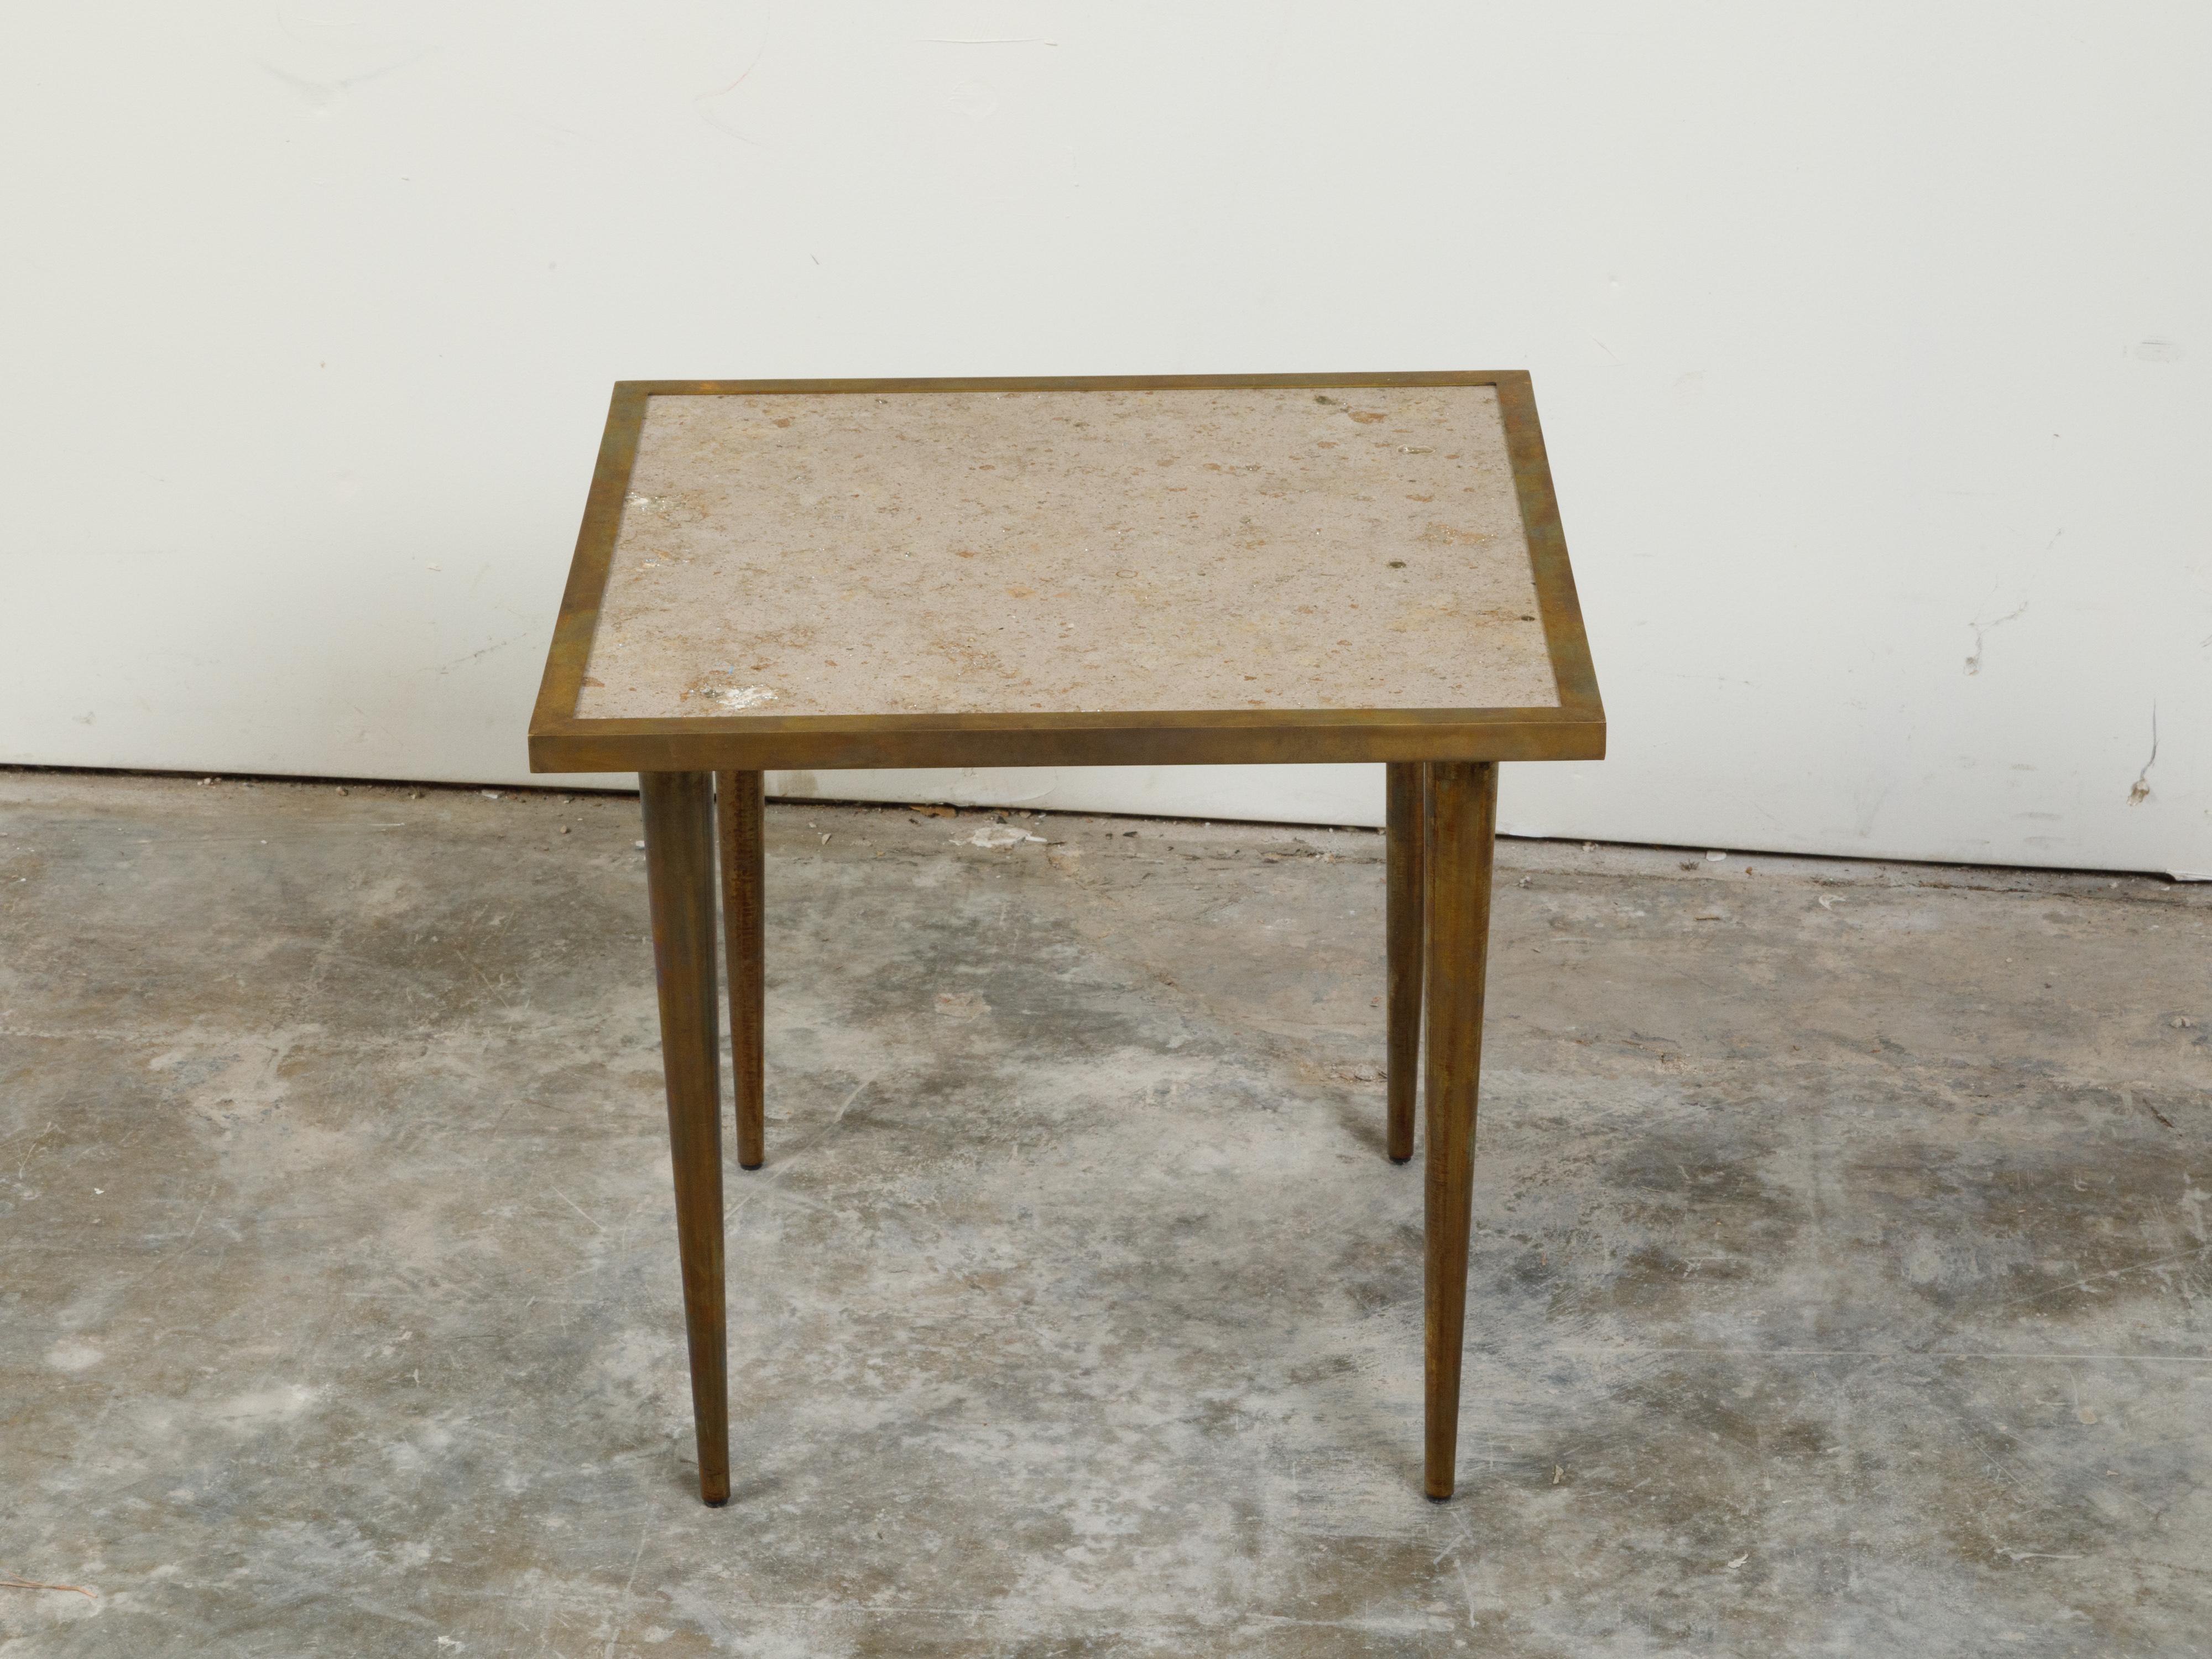 20th Century Italian Midcentury Brass Coffee Table with Marble Top and Tapered Legs For Sale